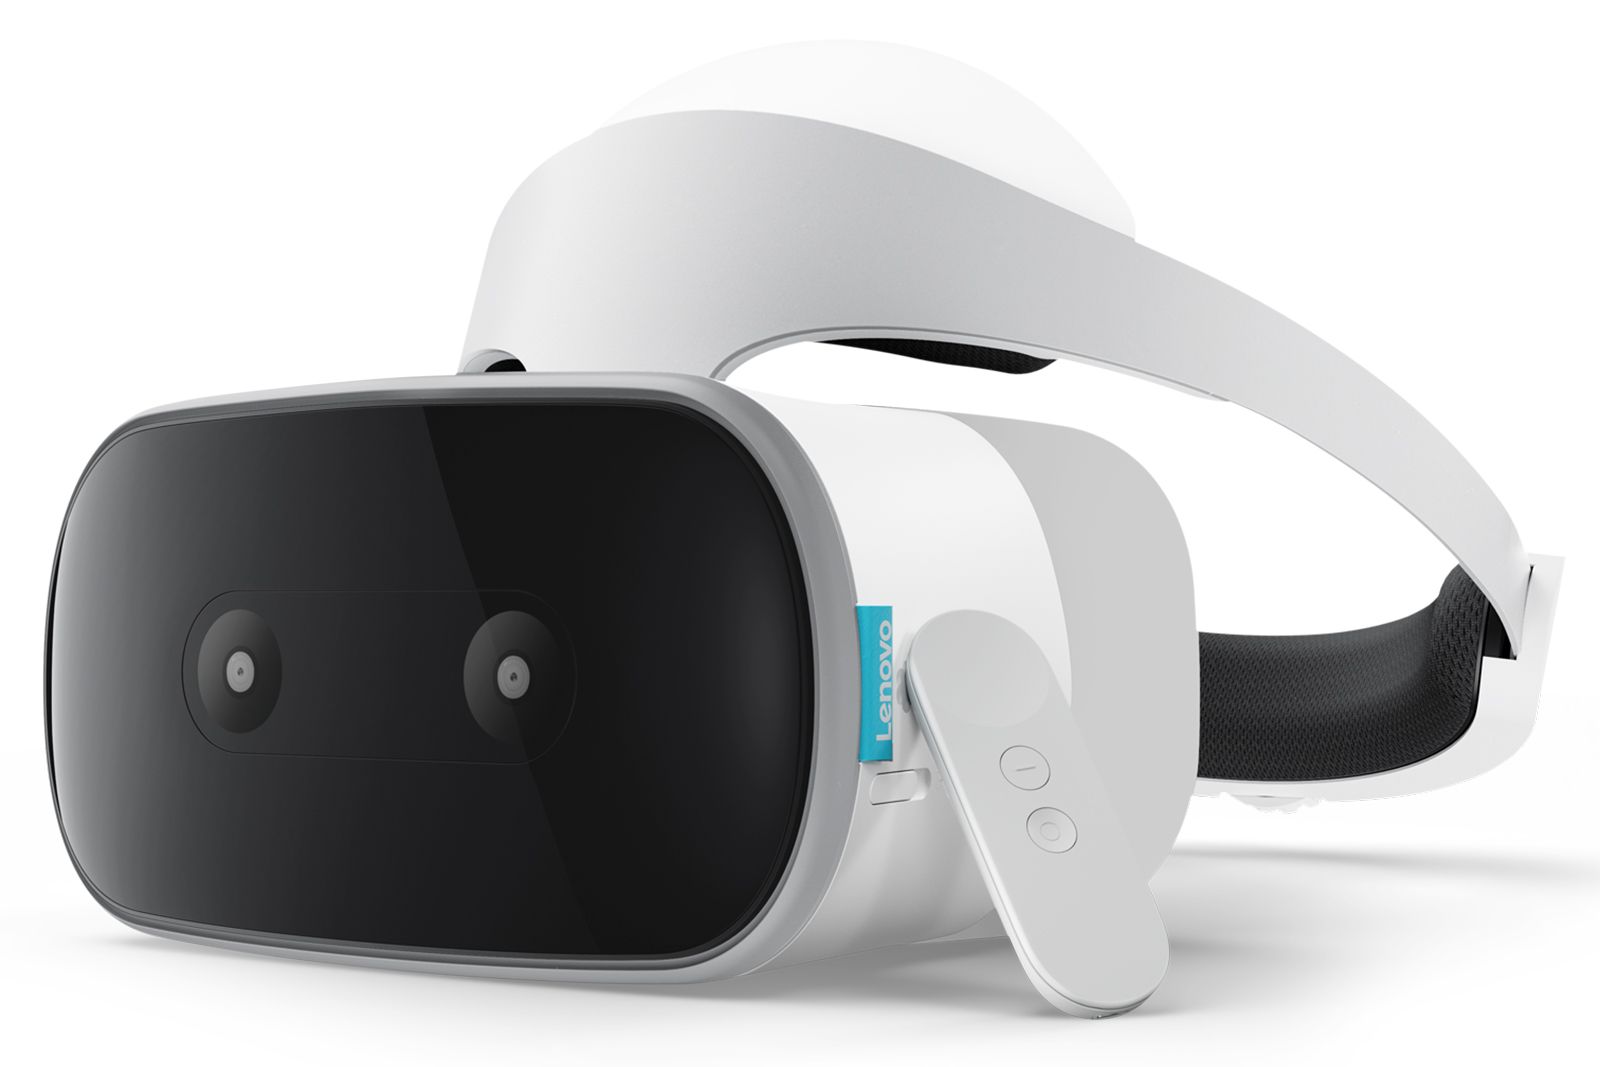 Lenovo goes big on VR for CES 2018 with Mirage Solo Daydream headset and Mirage Camera image 1